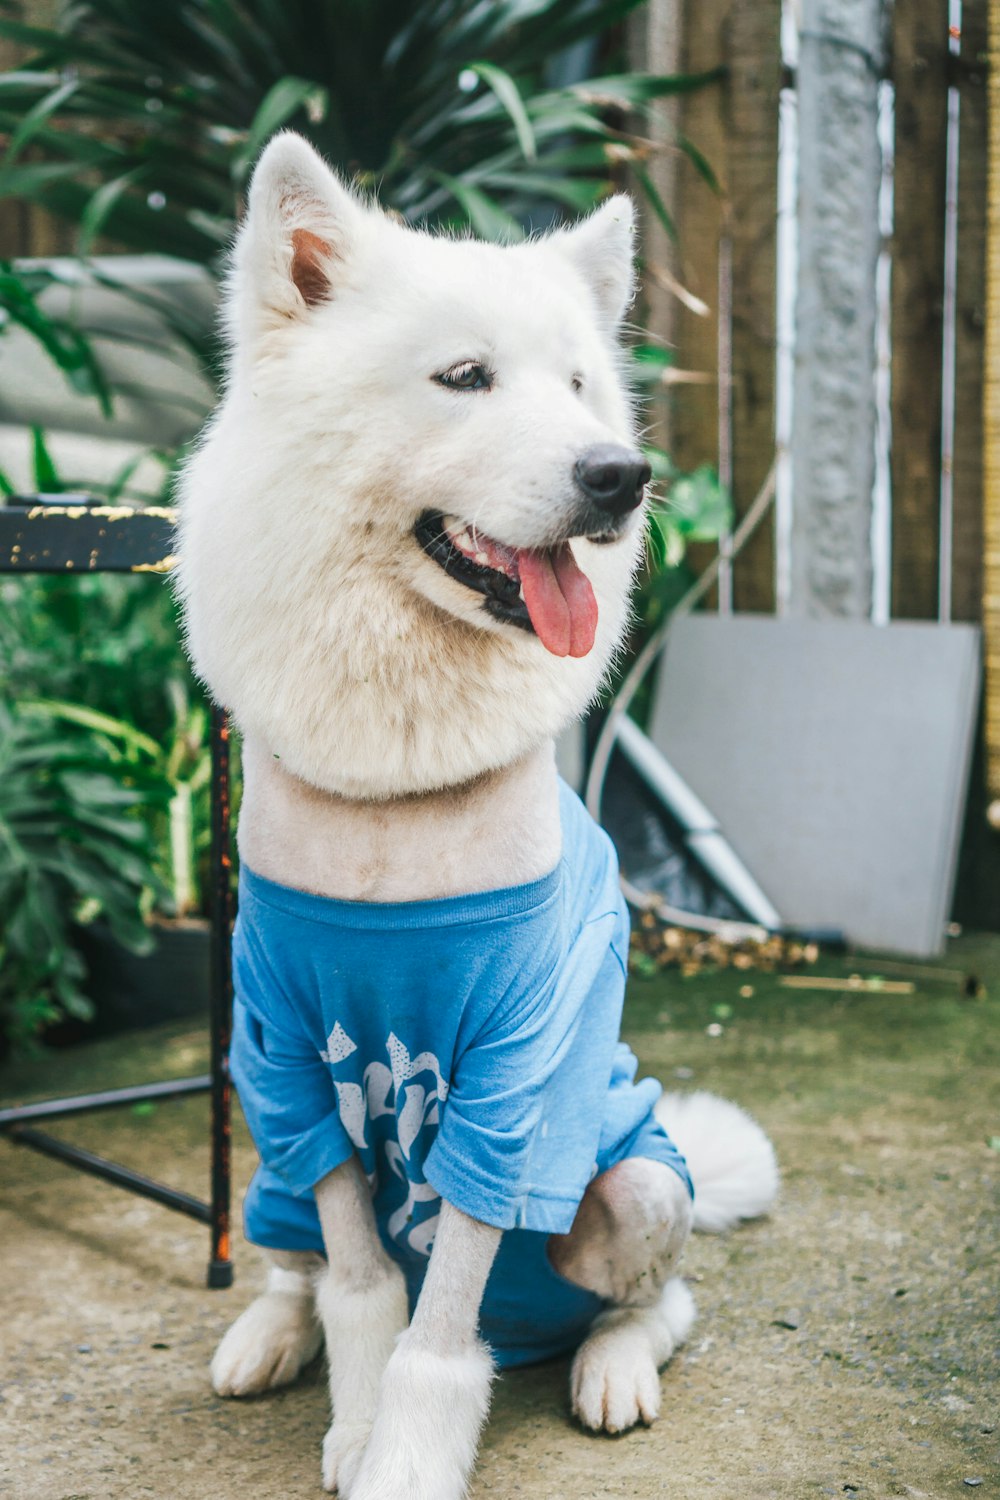 a white dog wearing a blue shirt sitting on the ground